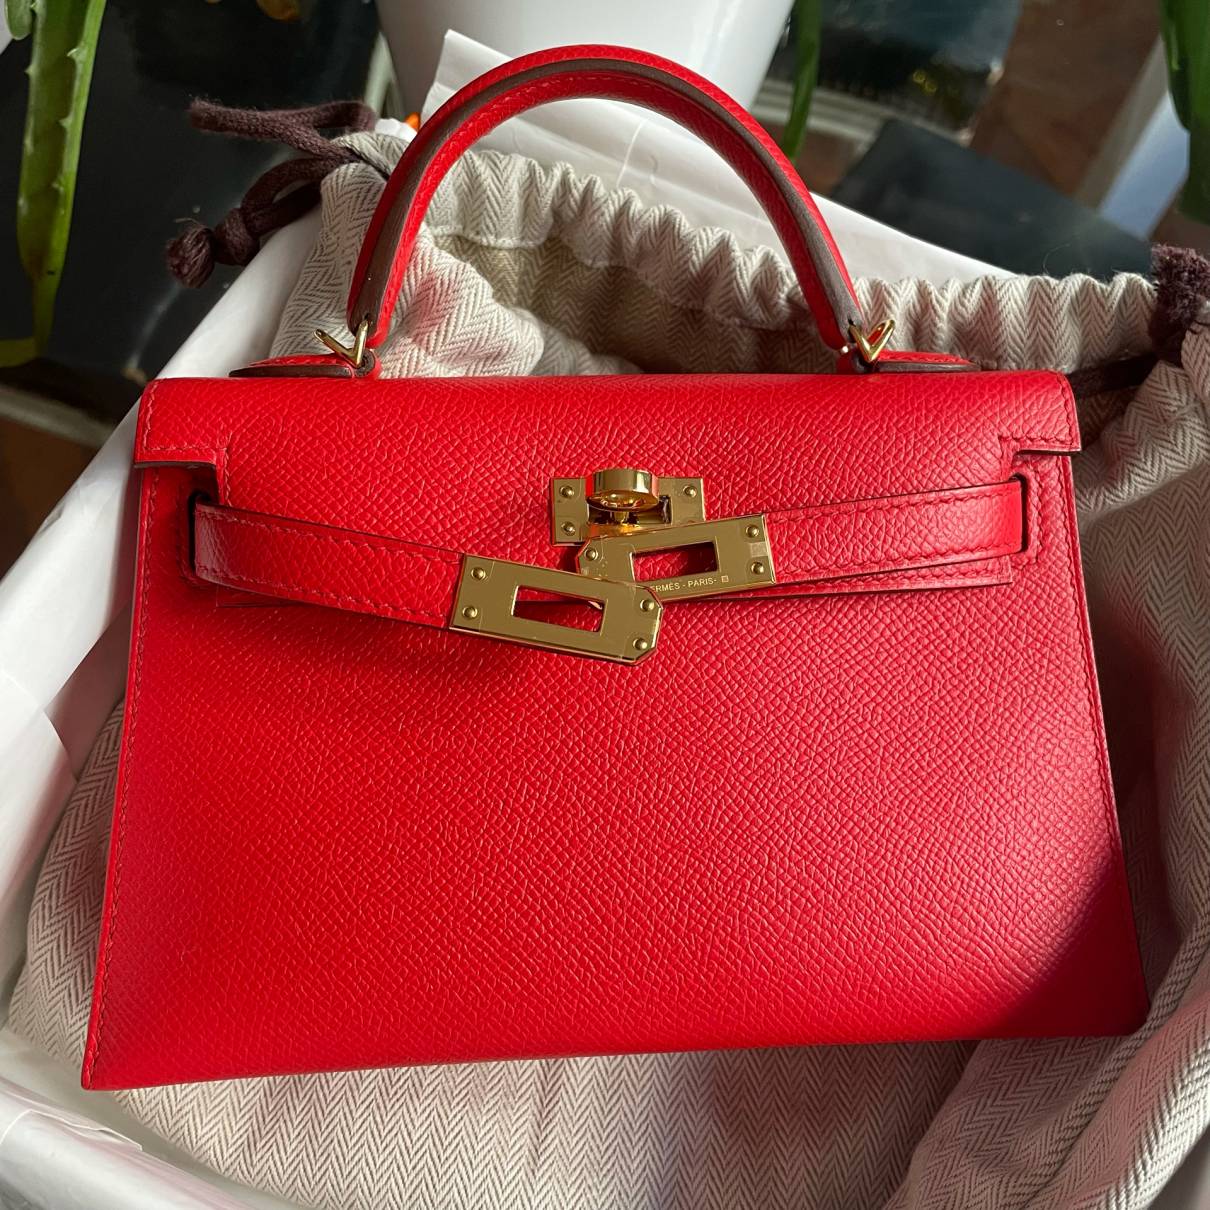 Hermès - Authenticated Kelly Mini Handbag - Leather Red Plain For Woman, Very Good condition